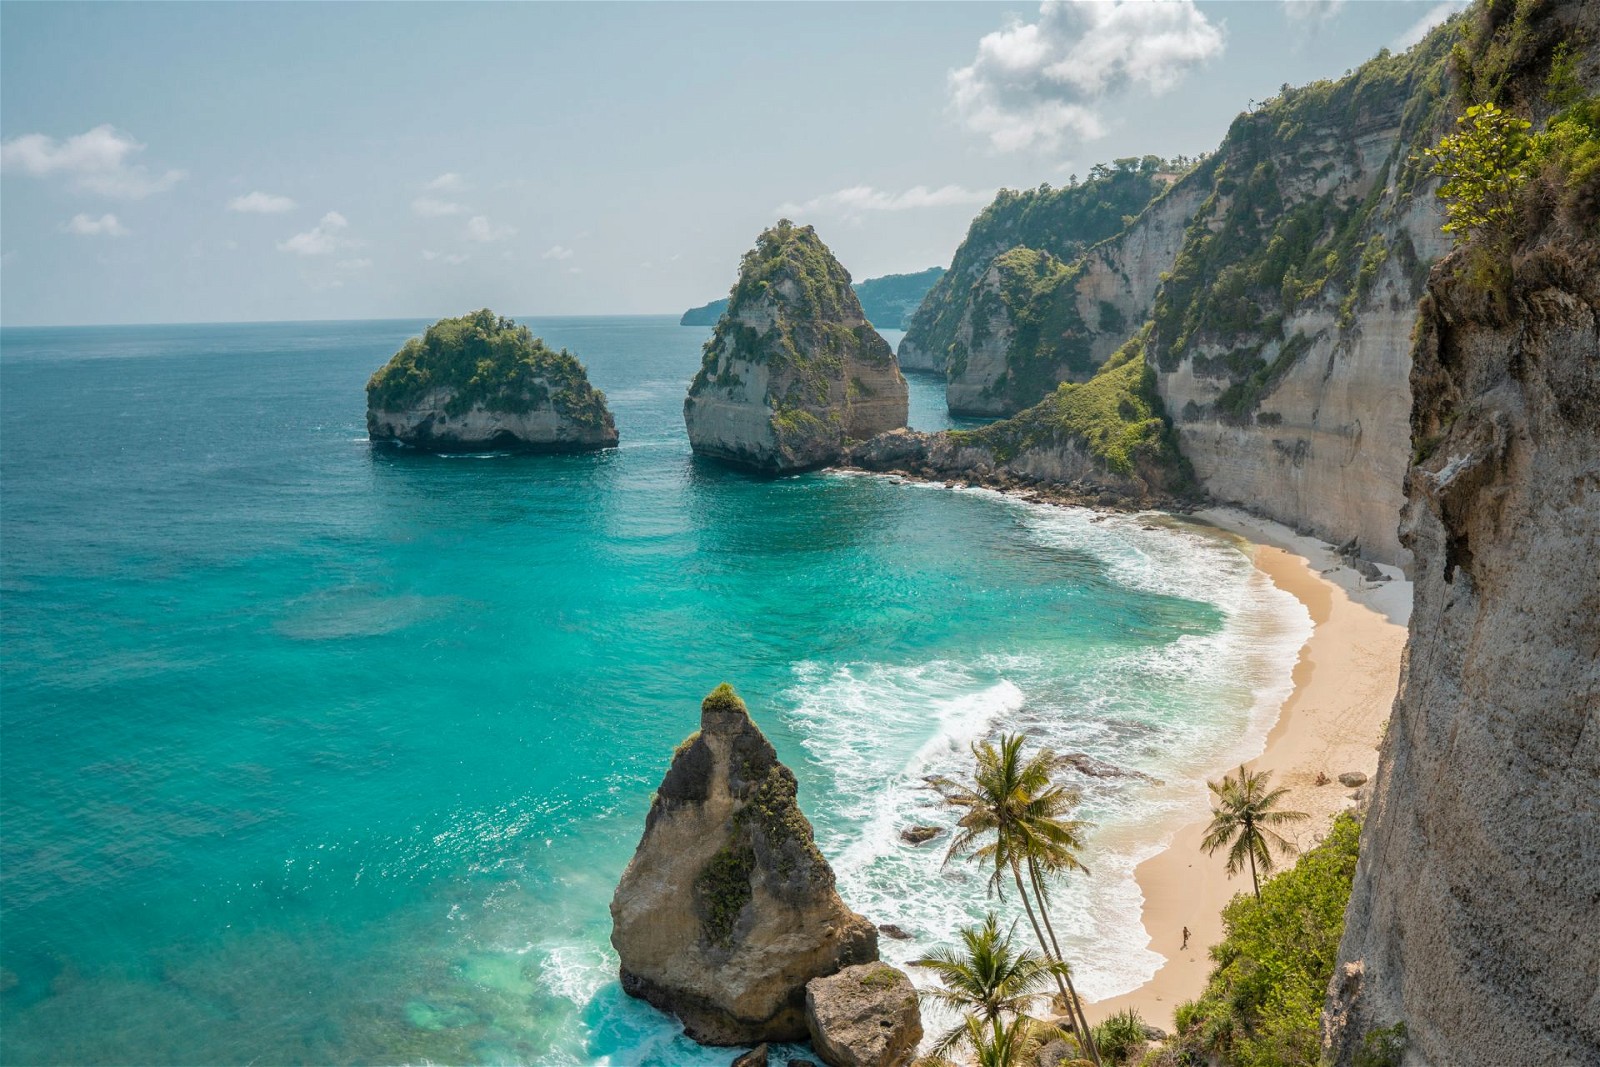 Escape the bustling tourist crowds and head to Nusa Penida, a serene island located southeast of Bali.